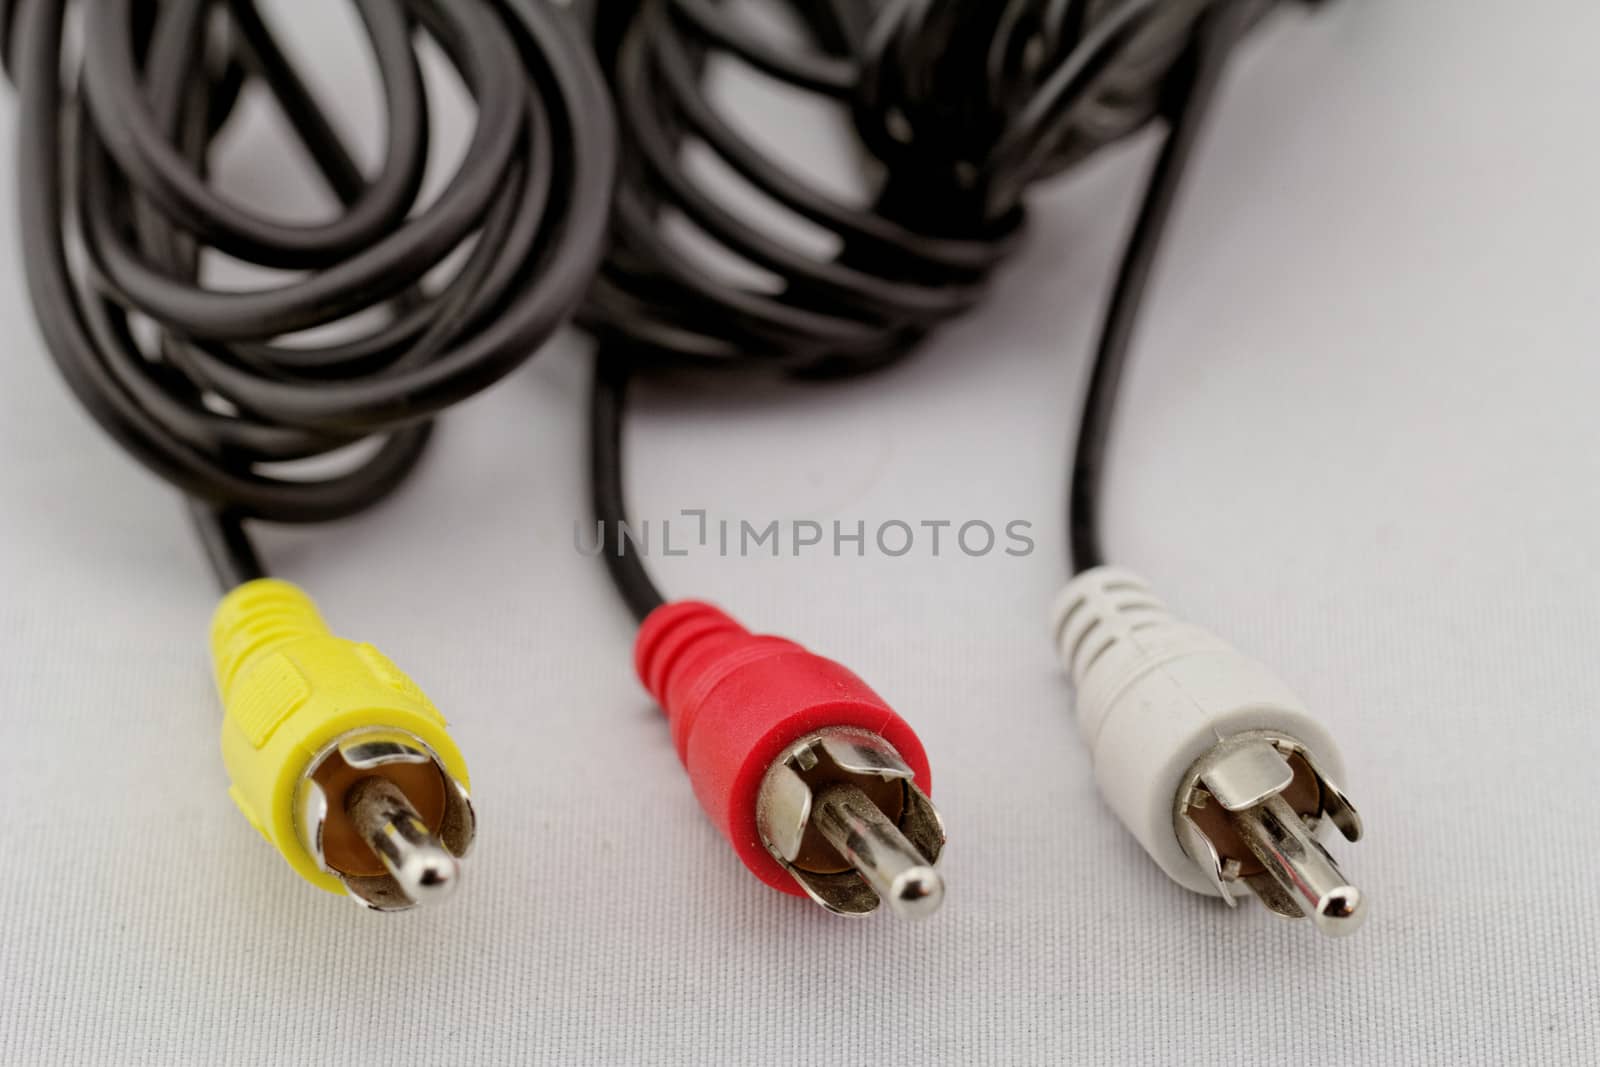 three audio (left - right) - video RCA cable and plug (red, white, yellow) on white background